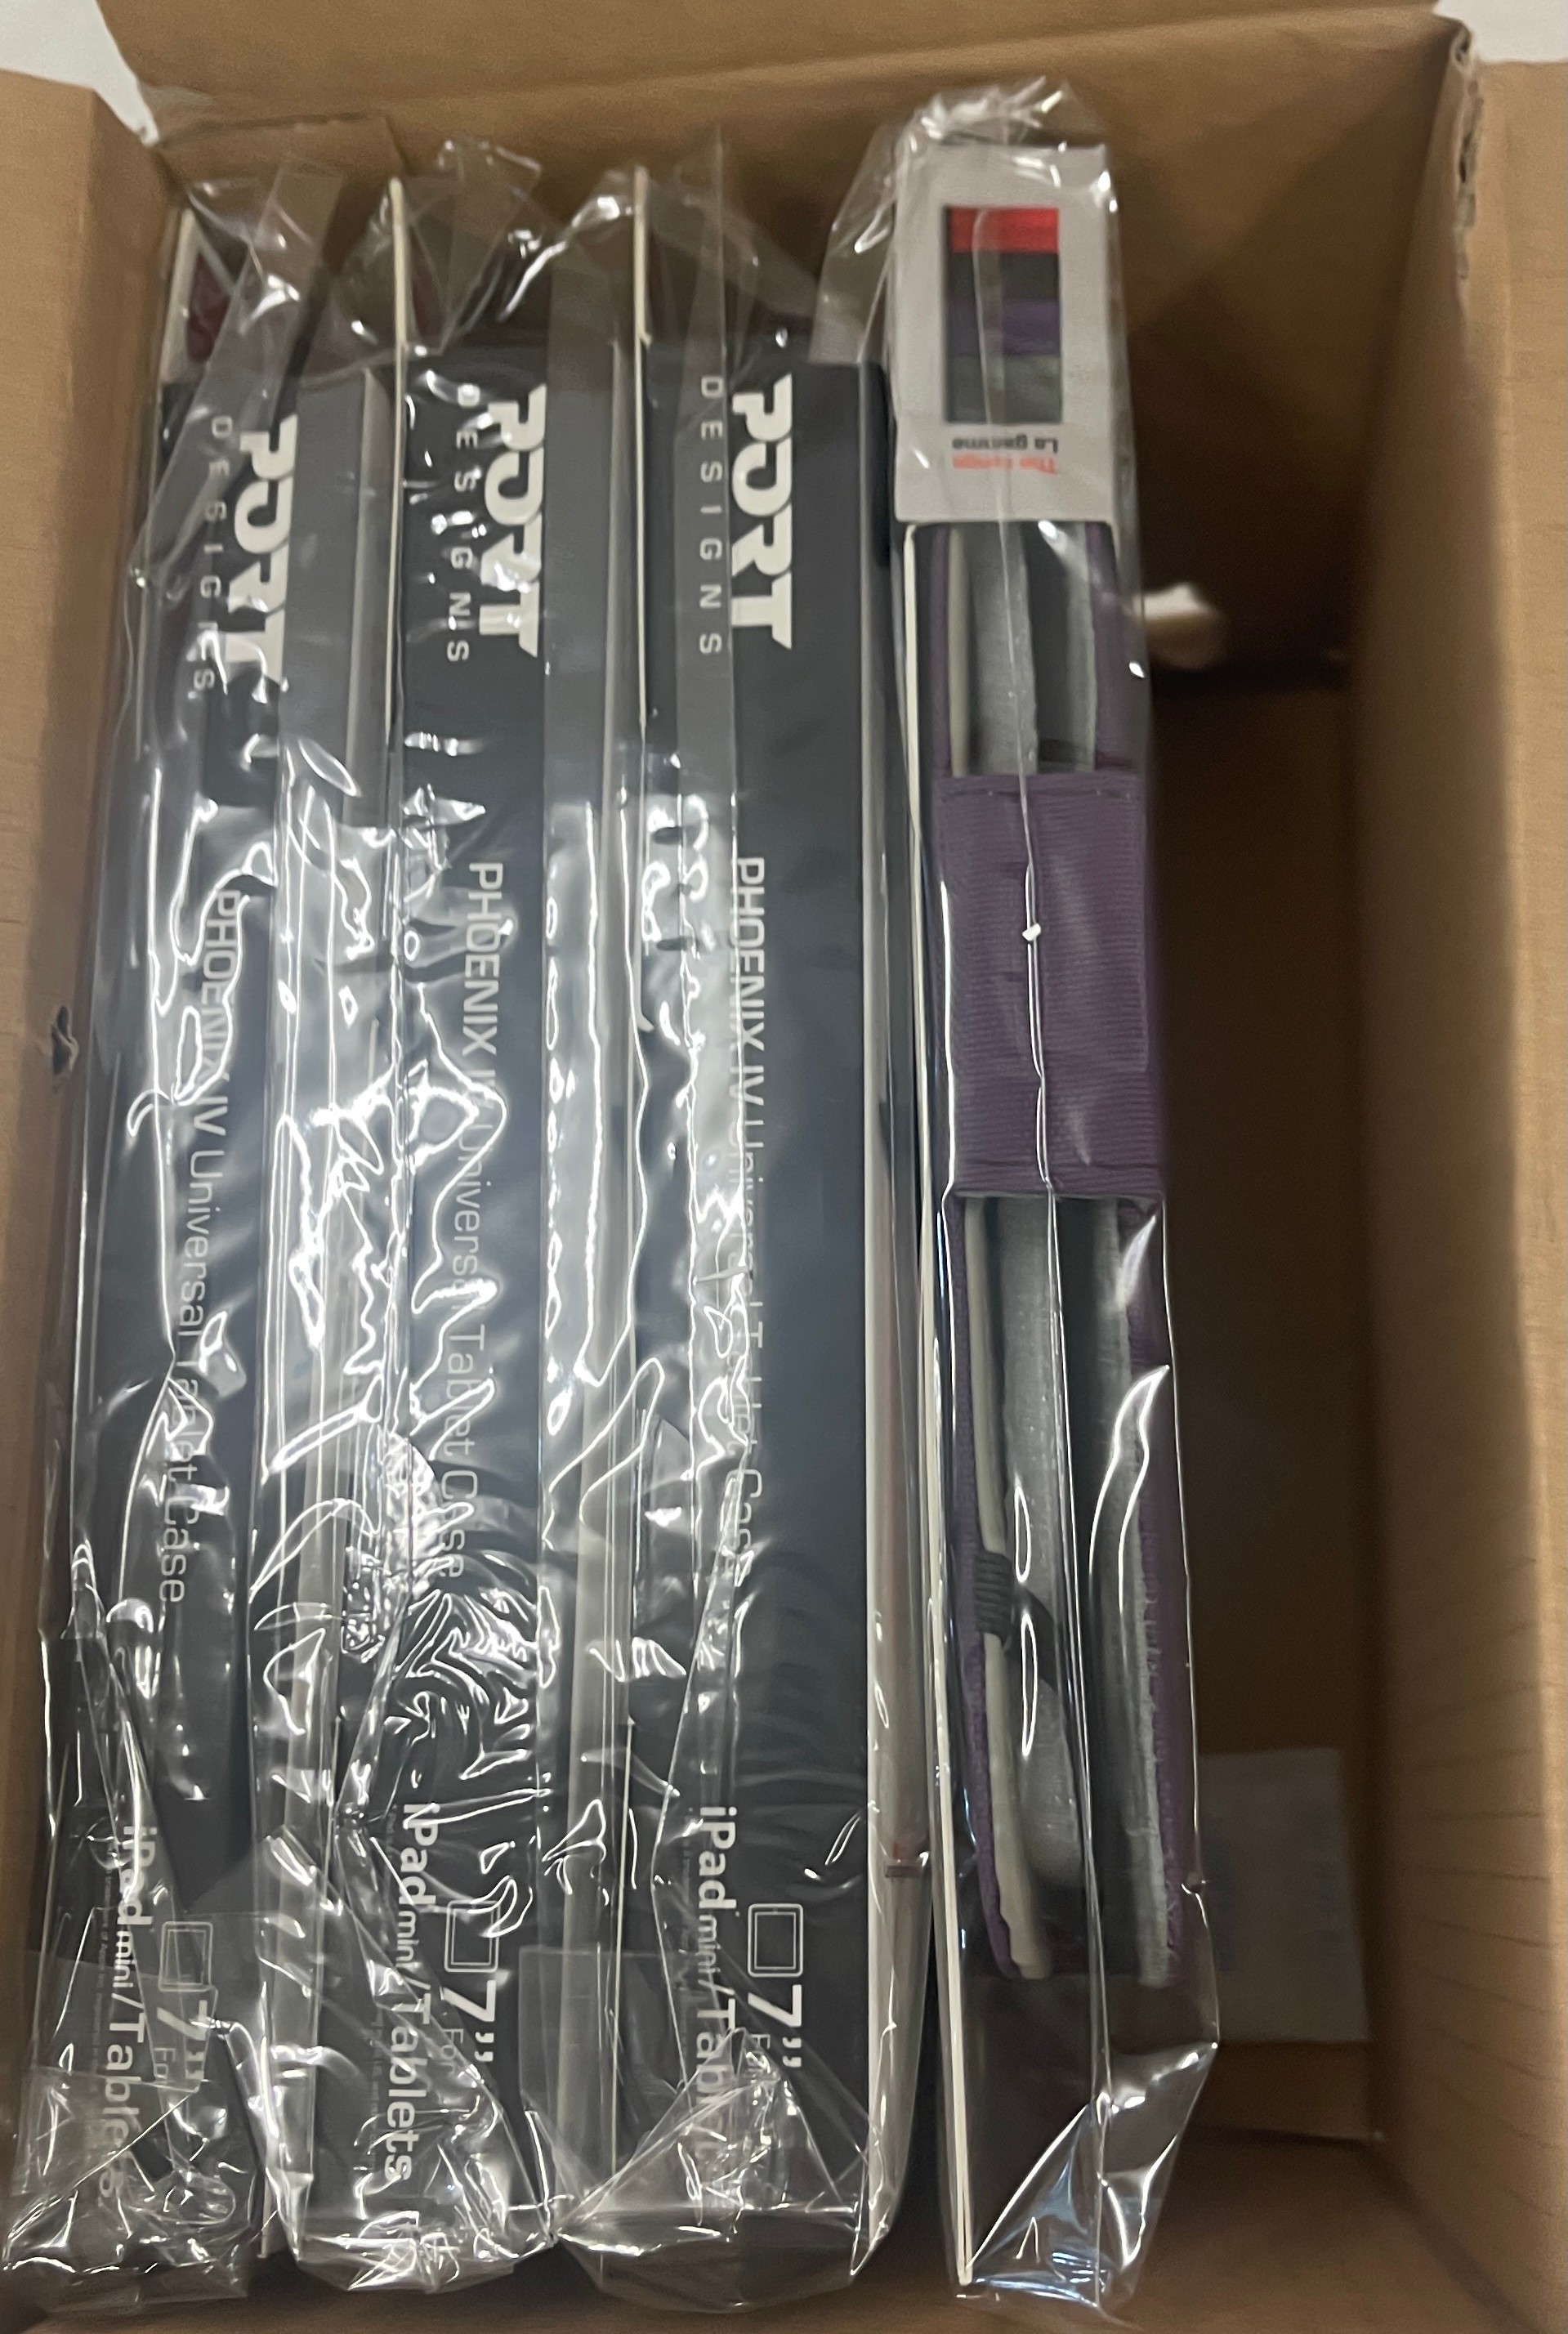 8 boxes each box containing 5 Purple Phoenix IV Universal cases Ipad mini / tablet 7 inches - Image 2 of 3